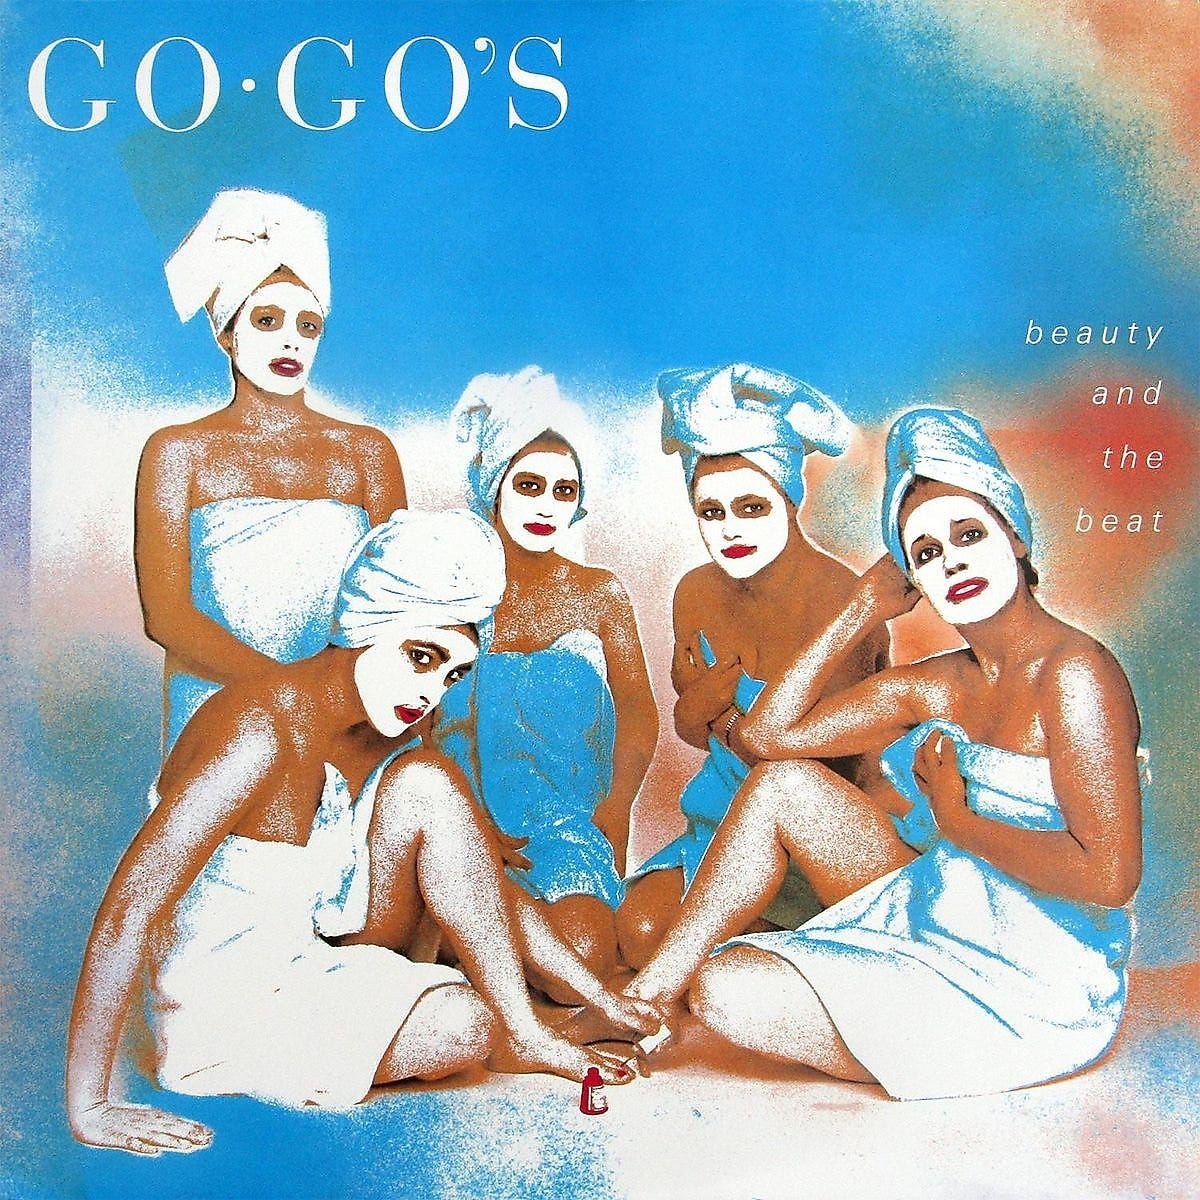 The Go-Go's "Beauty and the Beat" album cover.